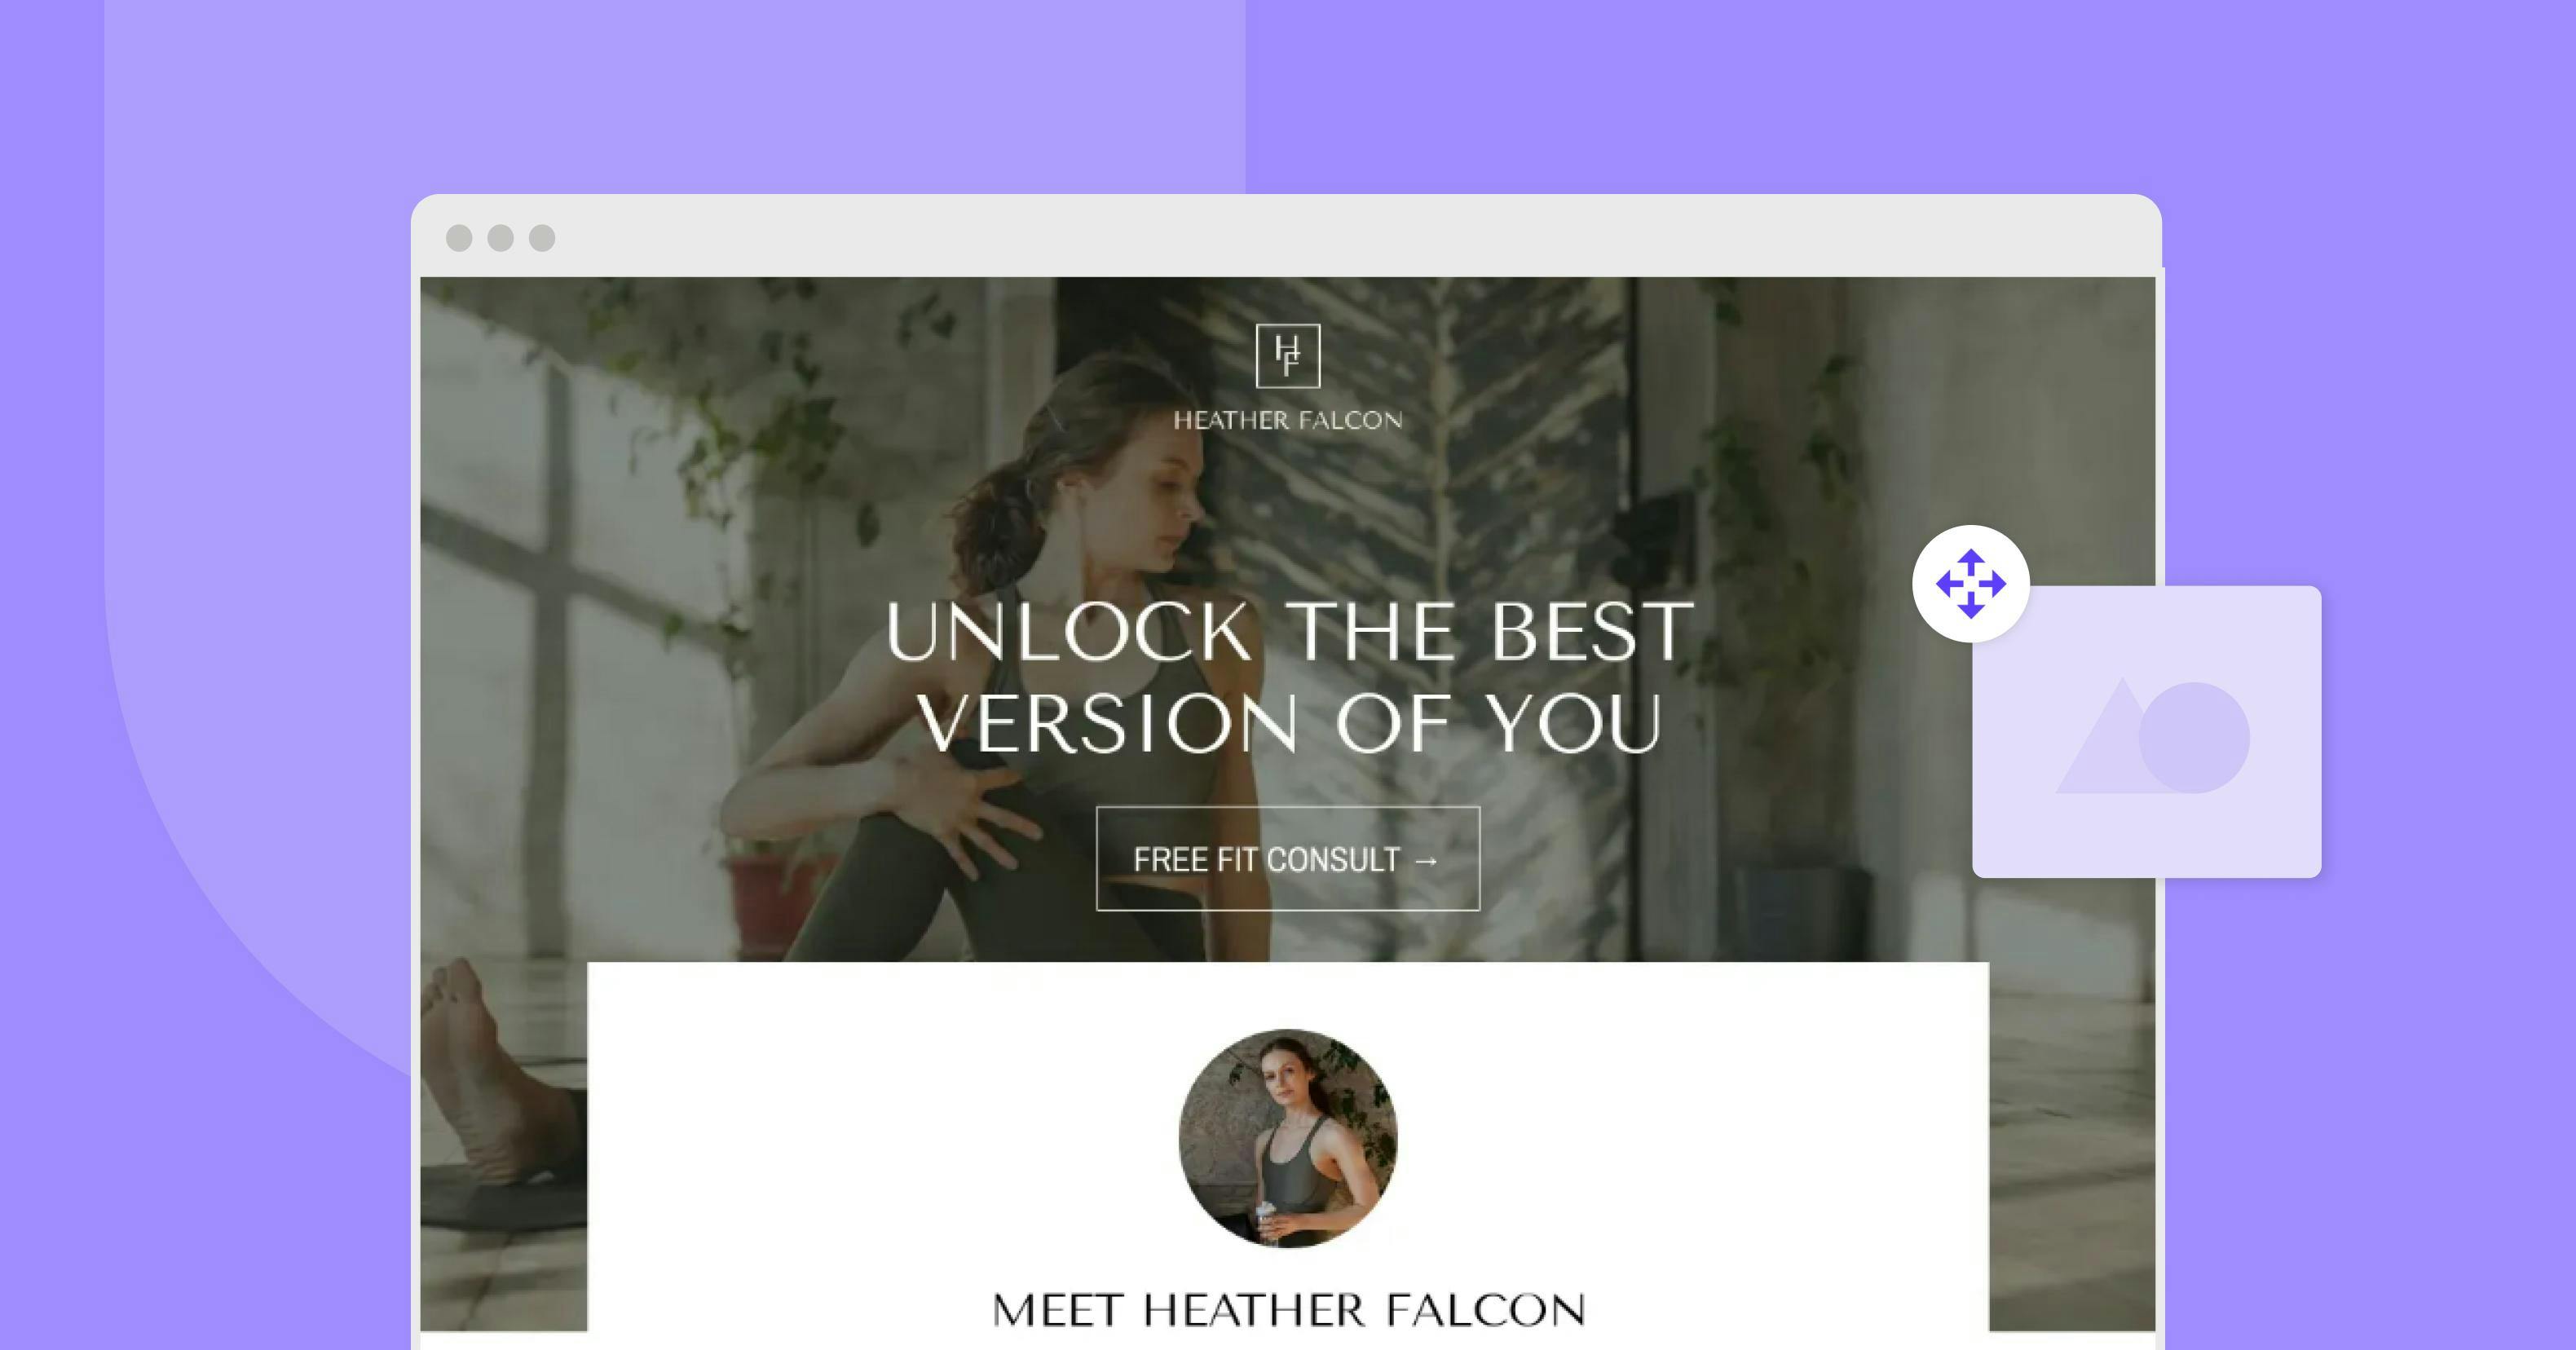 Landing page background showing a woman doing yoga with the text 'Unlock the best version of you' and a button labeled 'Free Fit Consult'. Below is a circular photo of Heather Falcon with the text 'Meet Heather Falcon'.